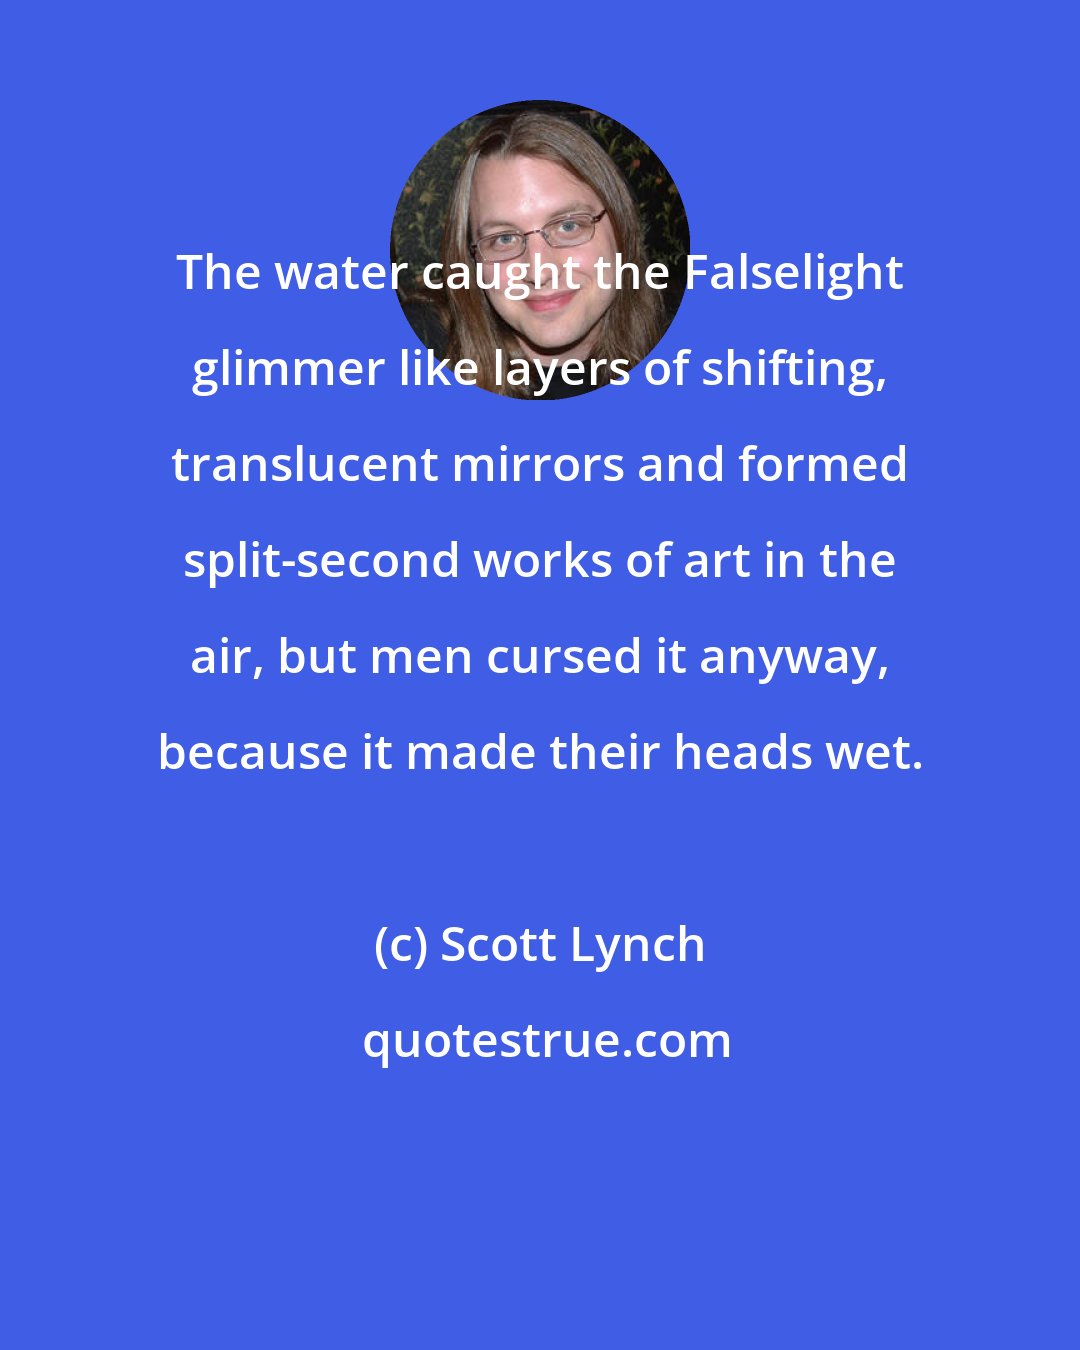 Scott Lynch: The water caught the Falselight glimmer like layers of shifting, translucent mirrors and formed split-second works of art in the air, but men cursed it anyway, because it made their heads wet.